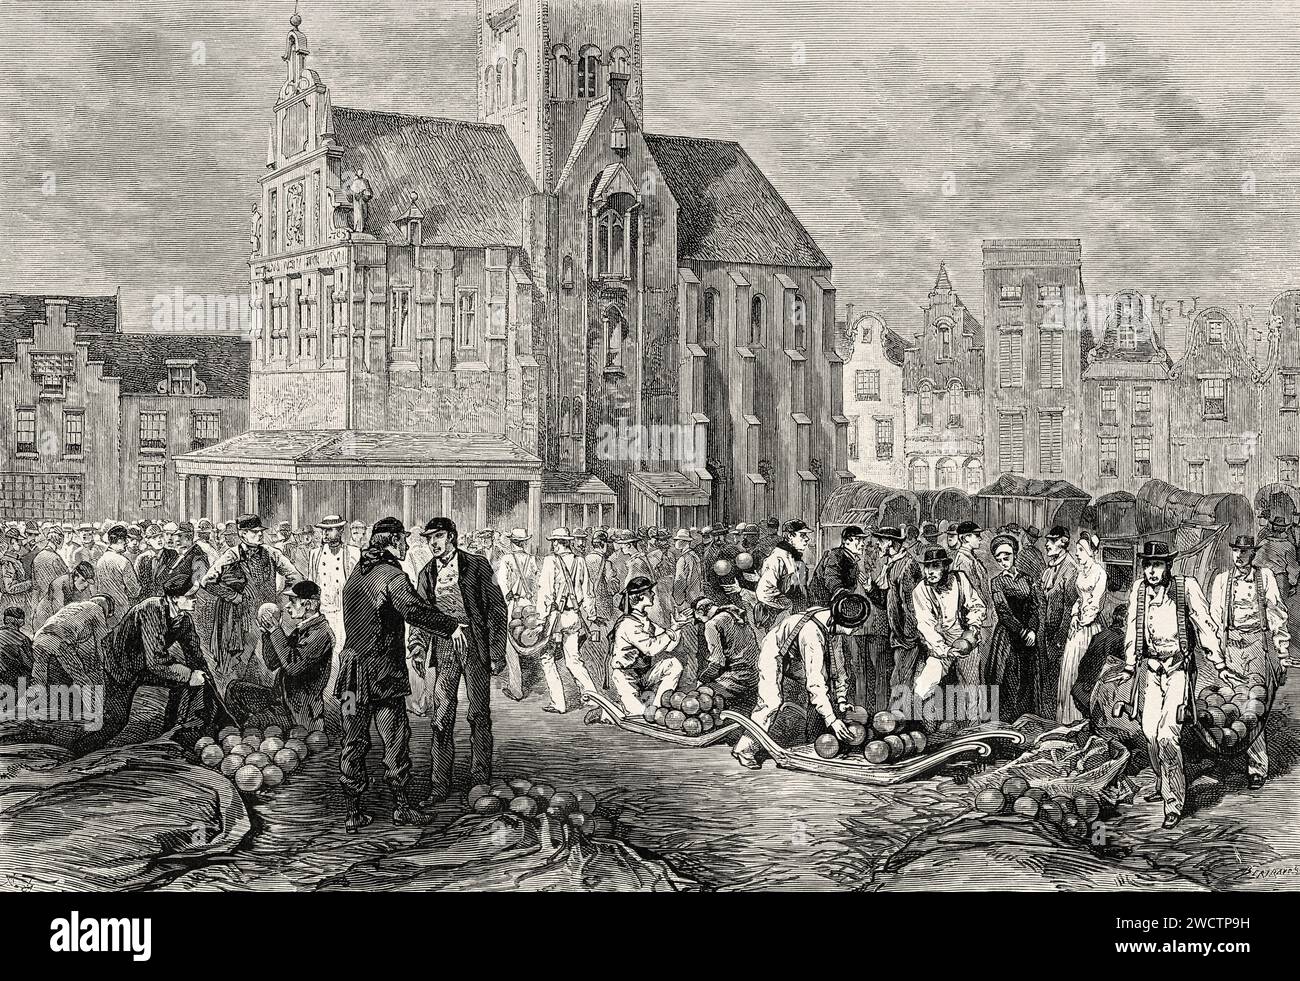 The cheese market in Hoorn, Holland. Europe. Netherlands 1878 by Charles de Coster (1827 - 1879) Old 19th century engraving from Le Tour du Monde 1880 Stock Photo